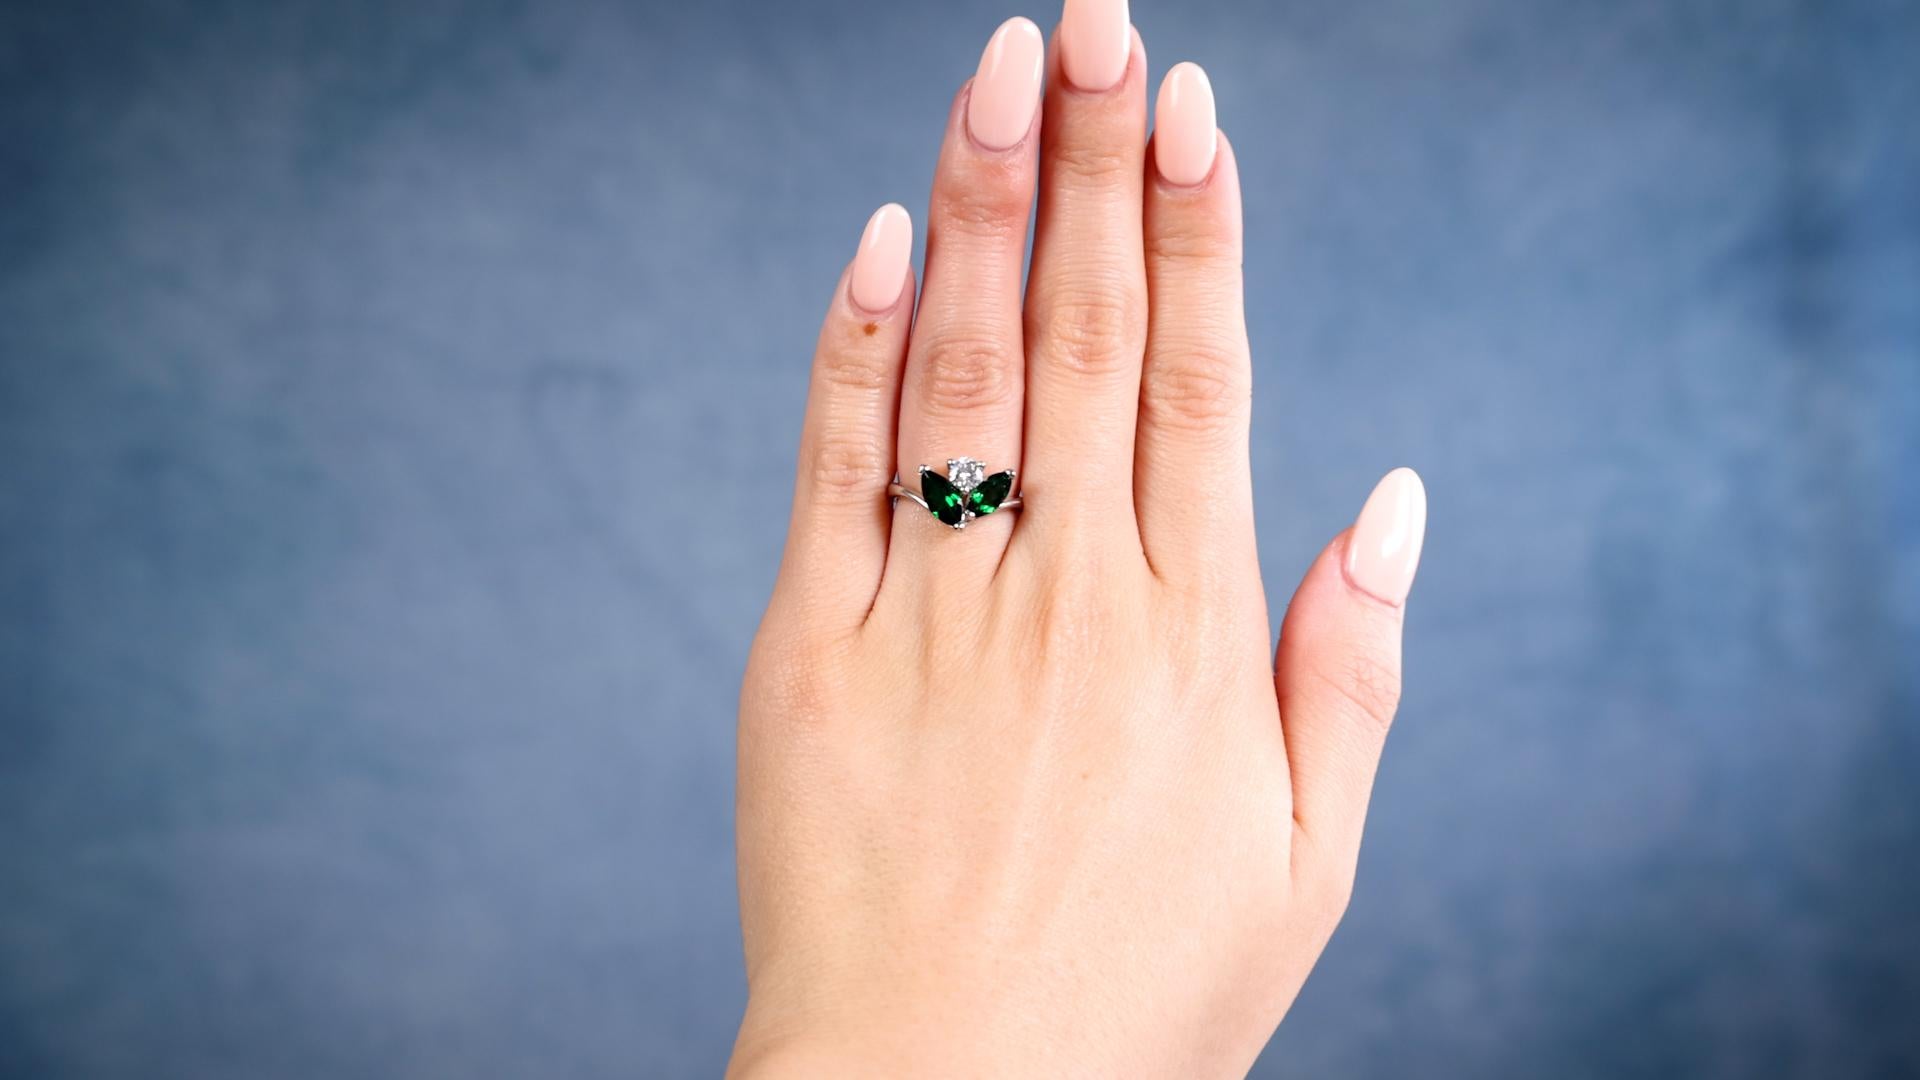 One Diamond Tsavorite Garnet Platinum Ring. Featuring one round brilliant cut diamond weighing 0.314 carat, graded G color, SI1 clarity. Accented by two marquise cut tsavorite garnets with a total weight of 1.32 carats. Crafted in platinum with